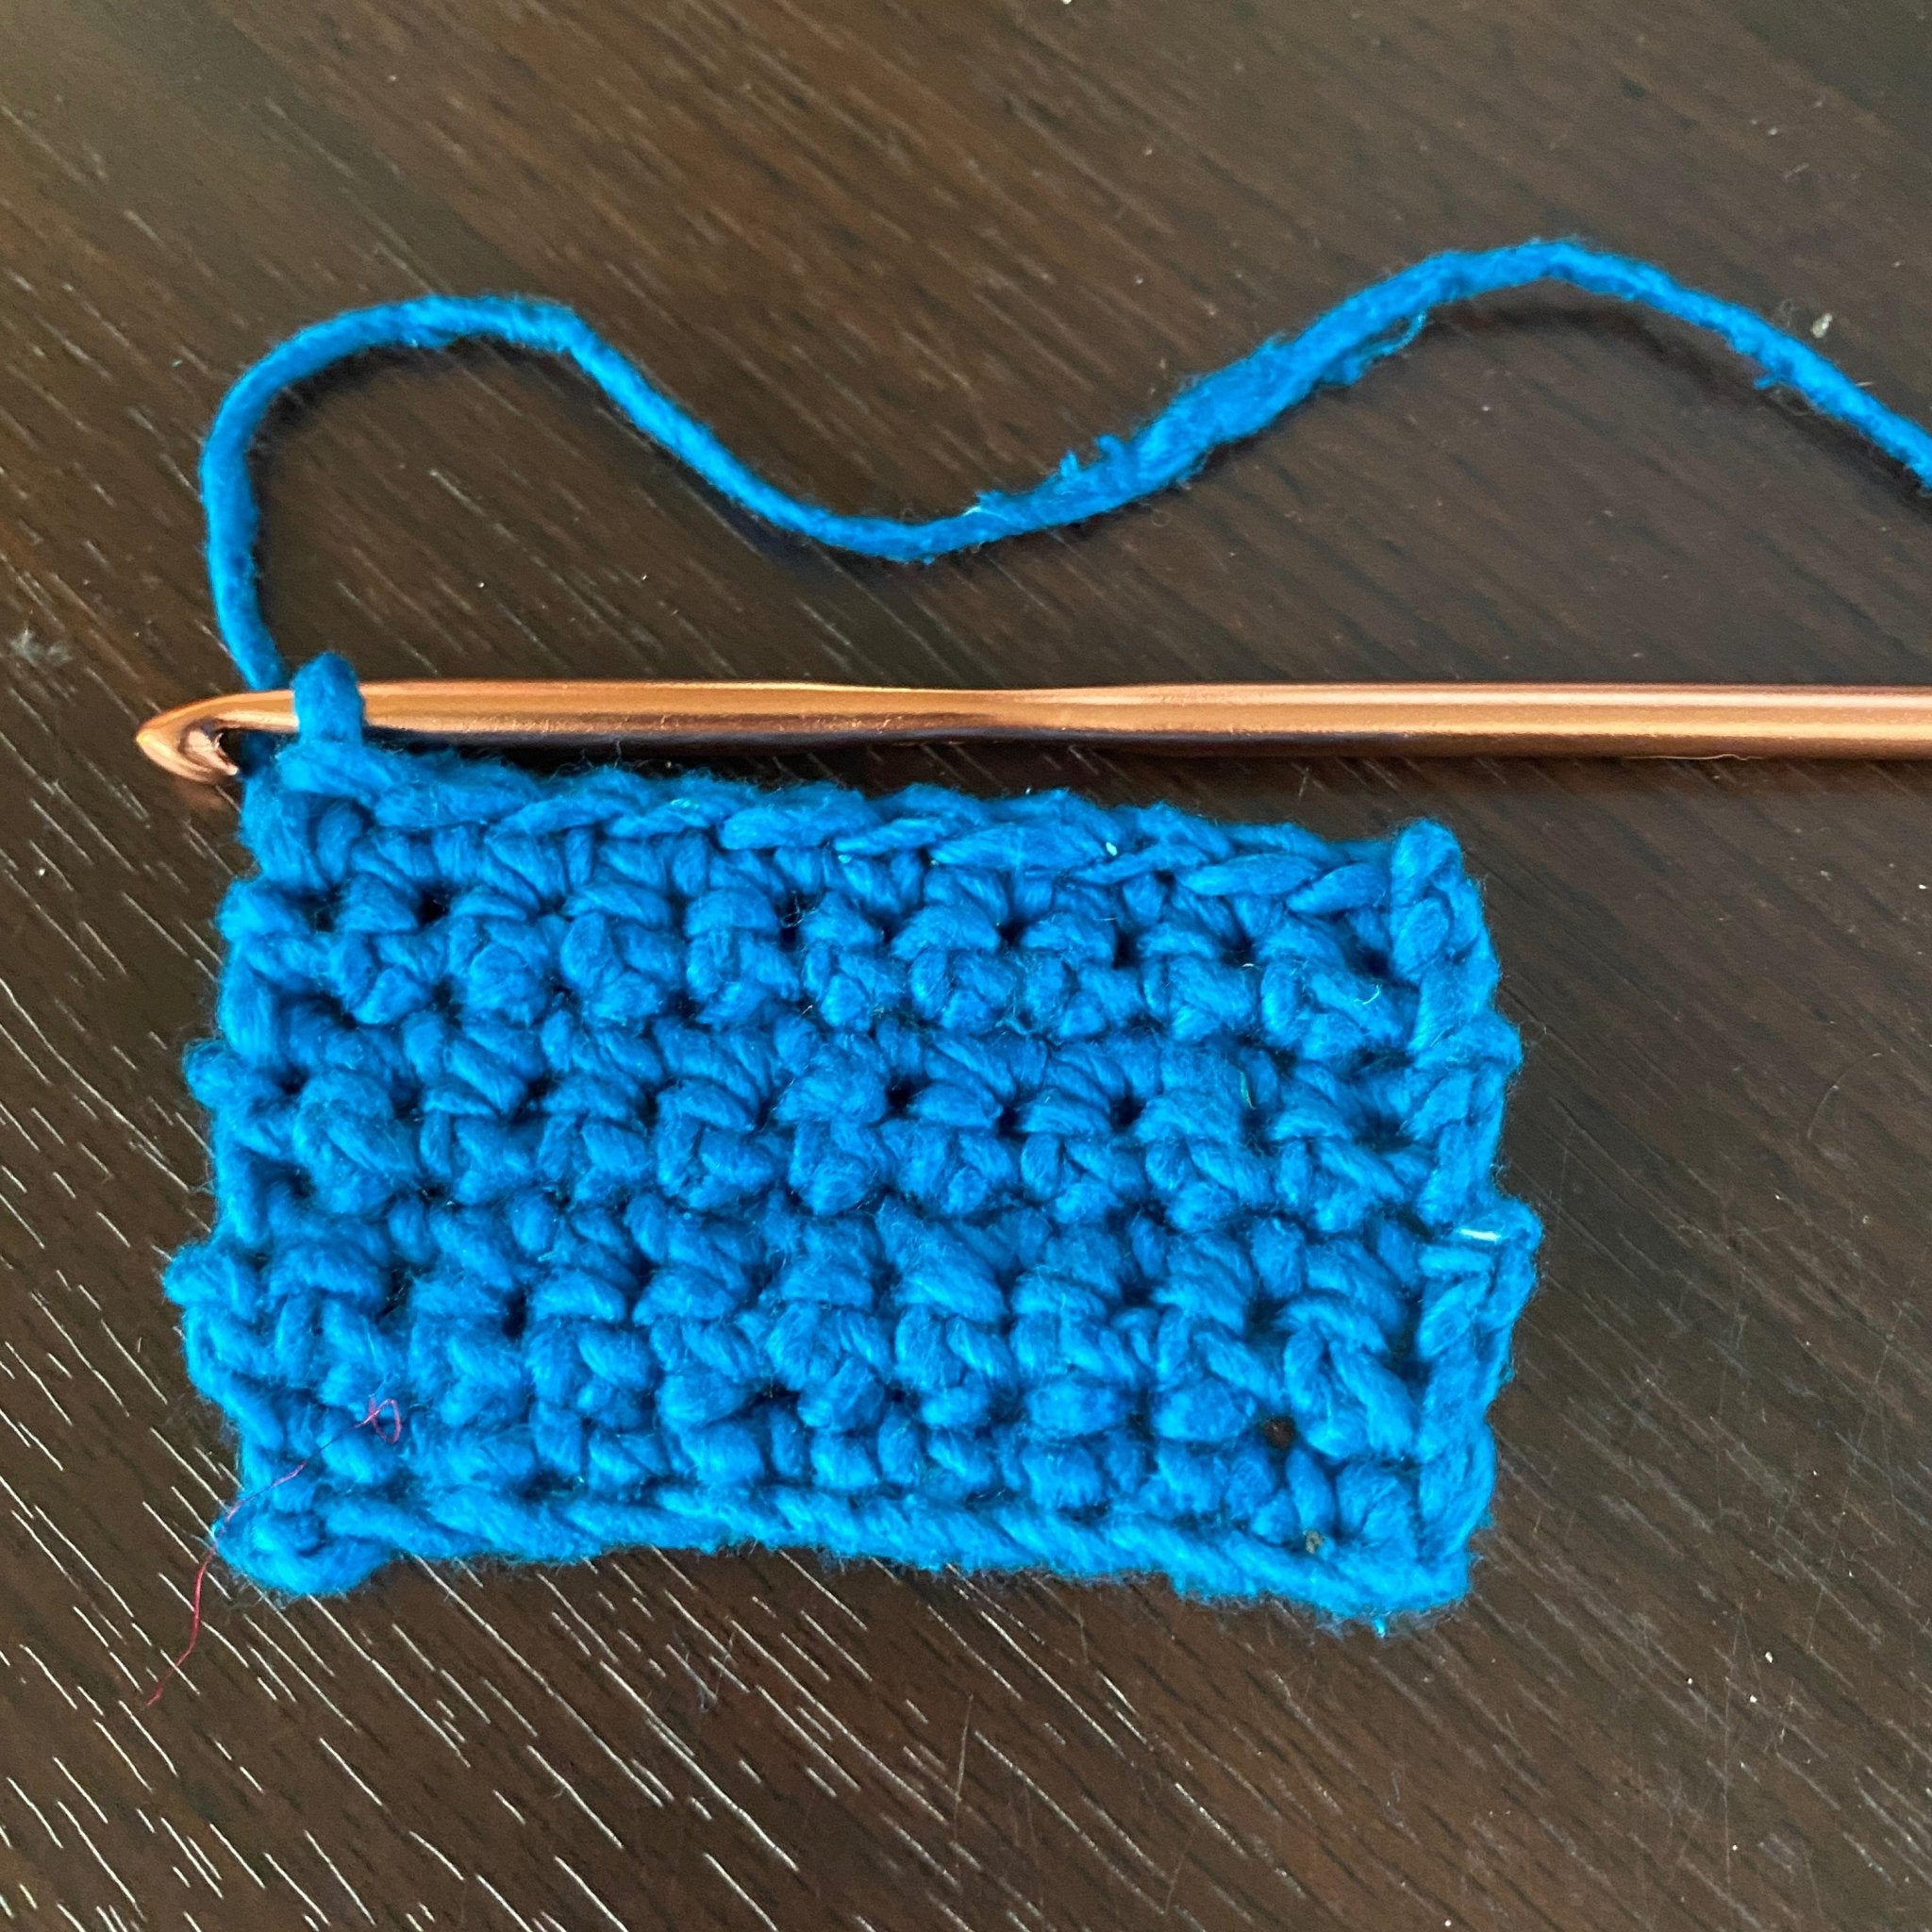 How To Count Stitches In Crochet – Darn Good Yarn